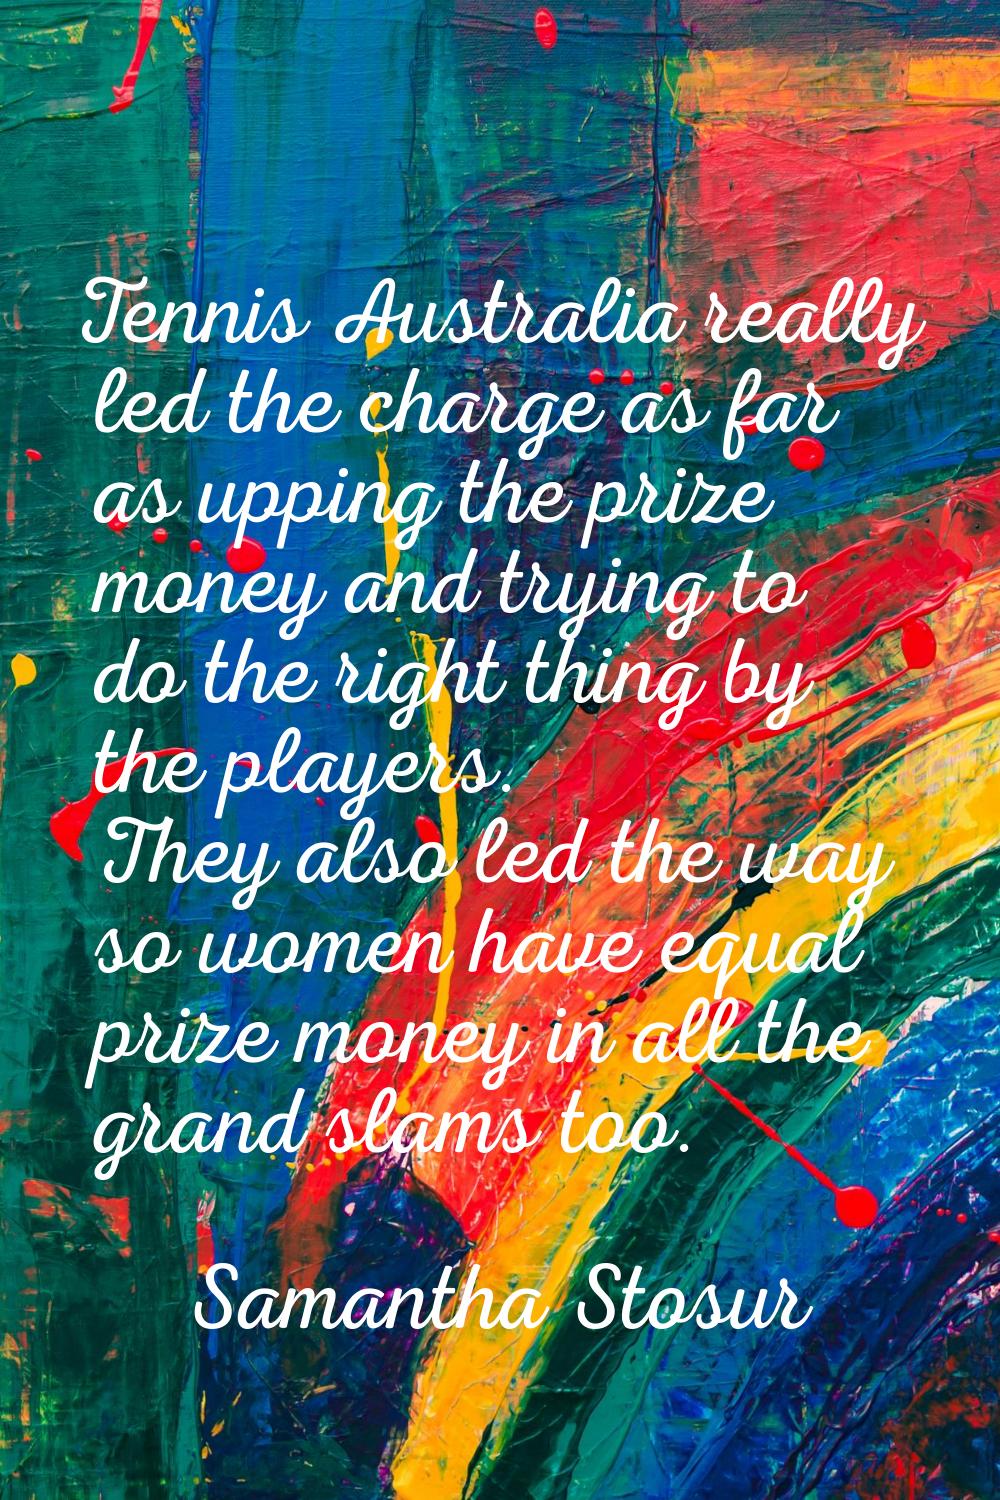 Tennis Australia really led the charge as far as upping the prize money and trying to do the right 